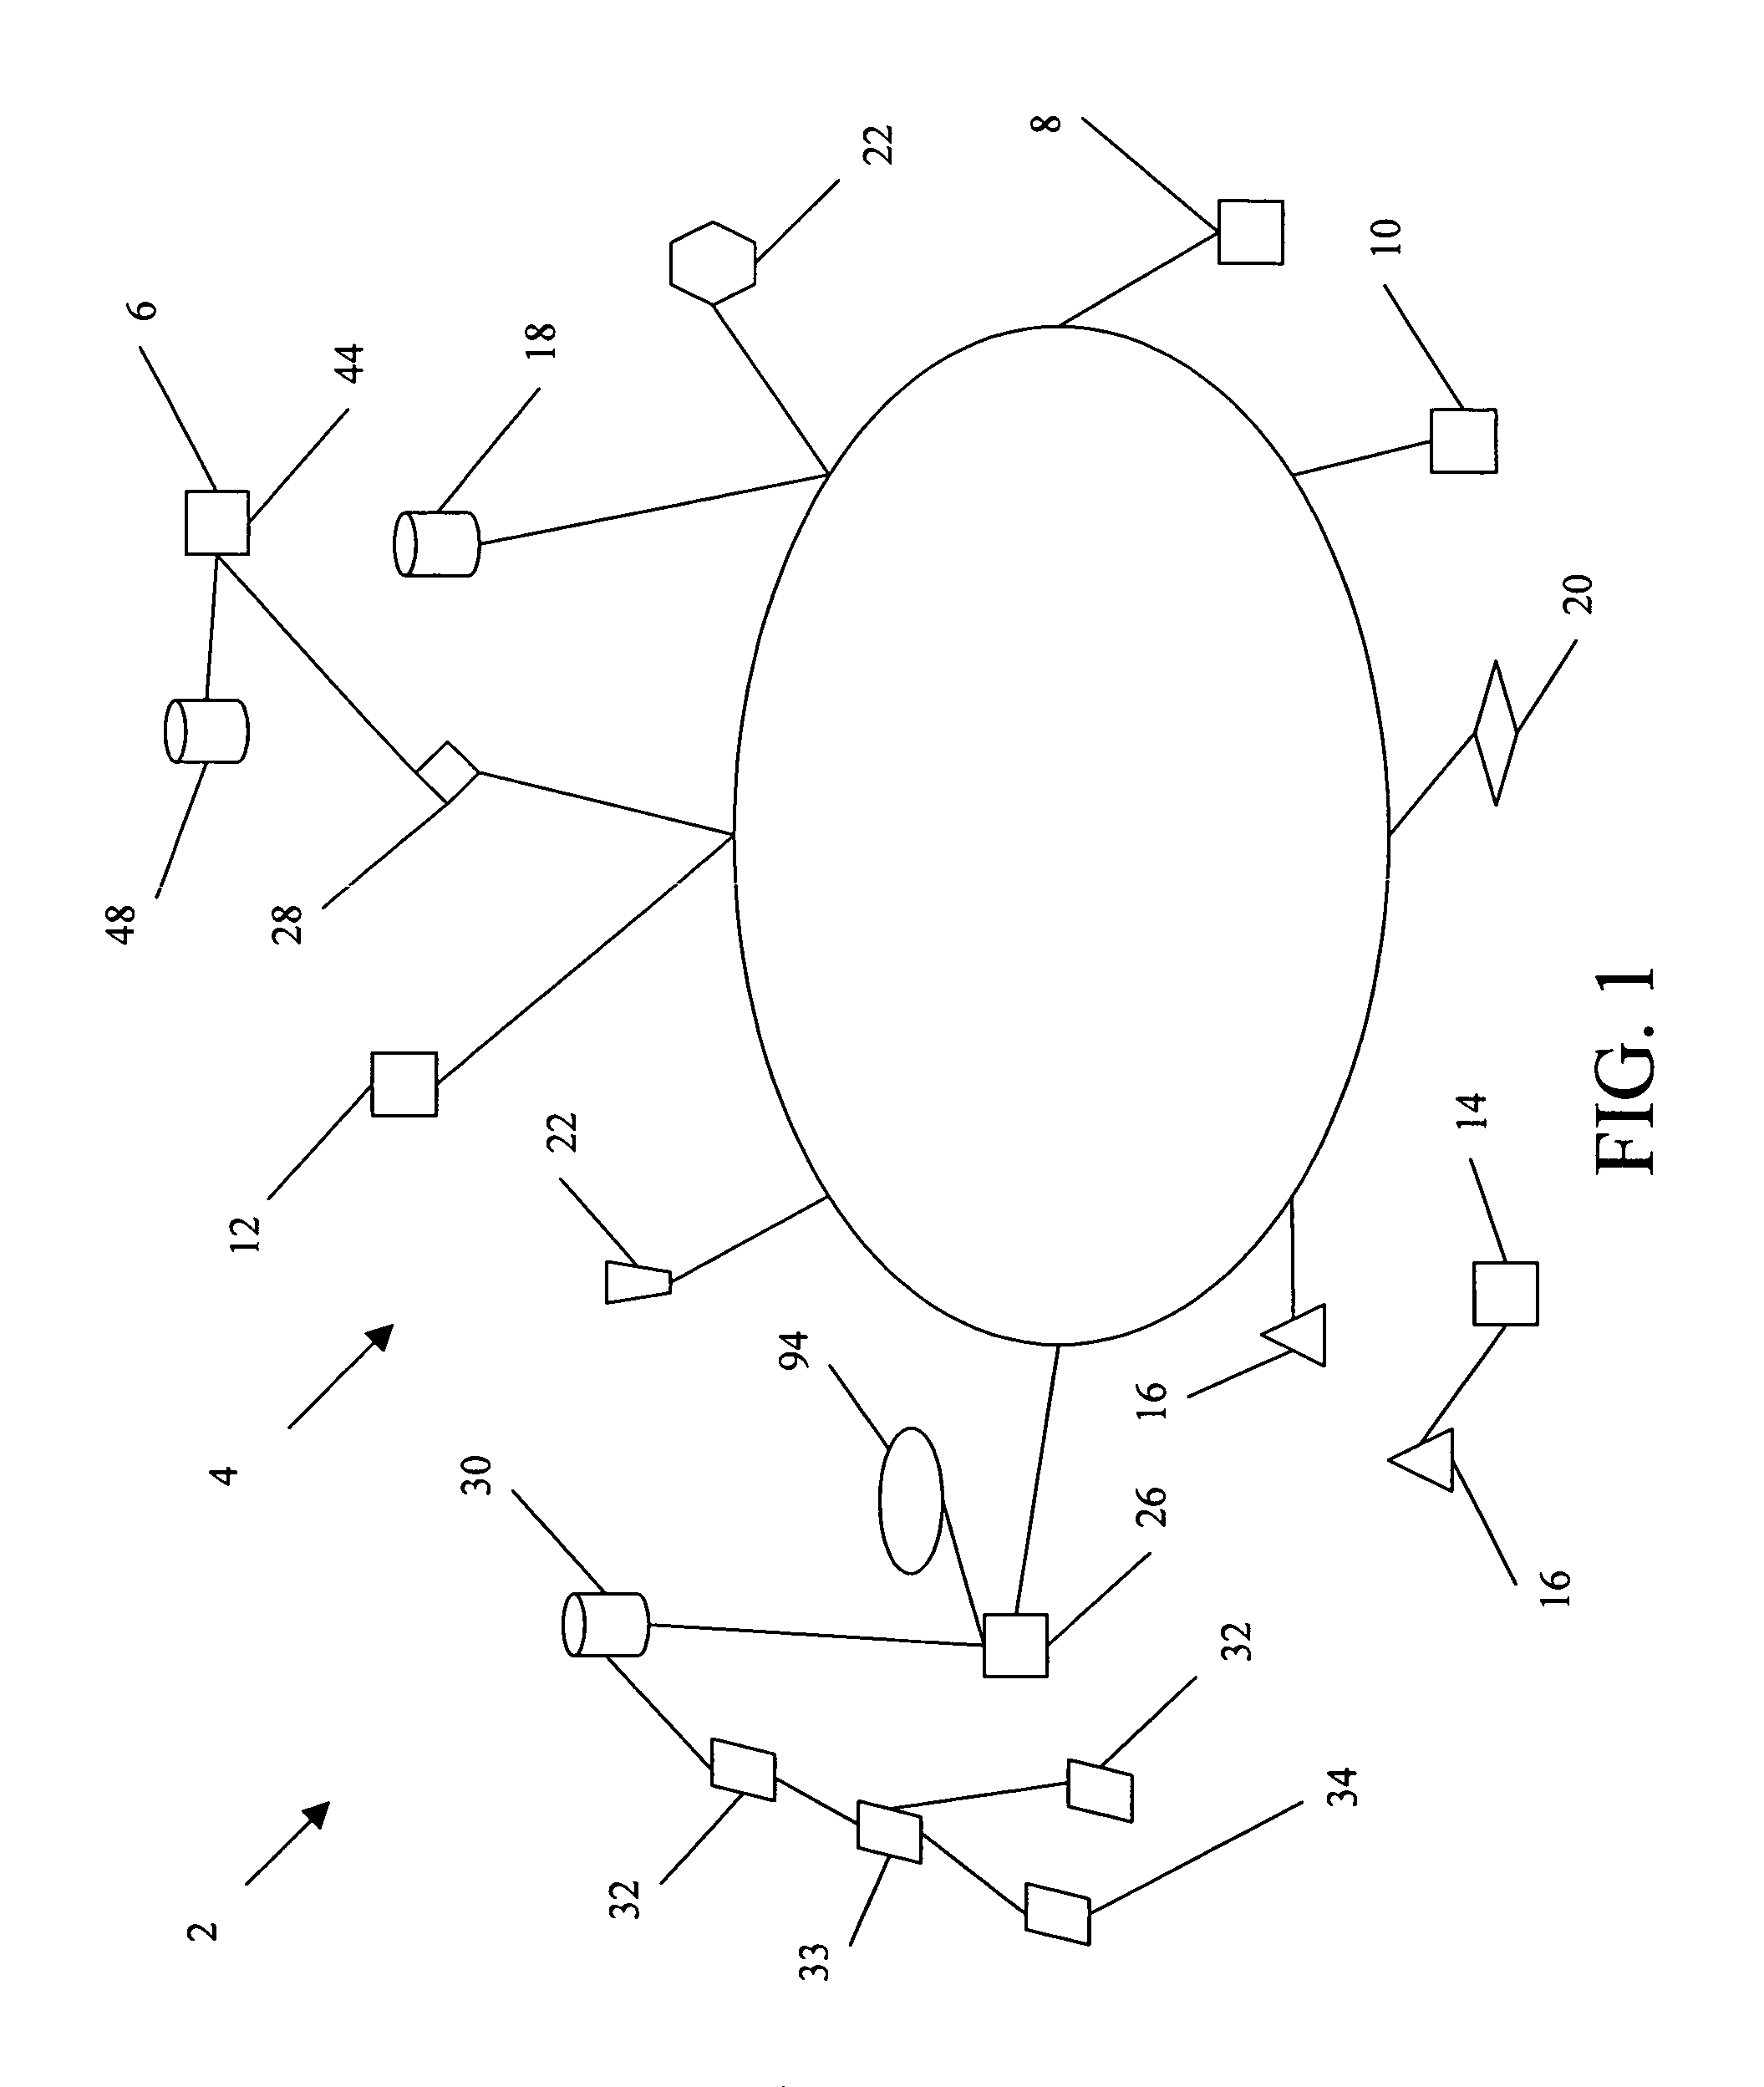 Method and system for improved in-line management of an information technology network